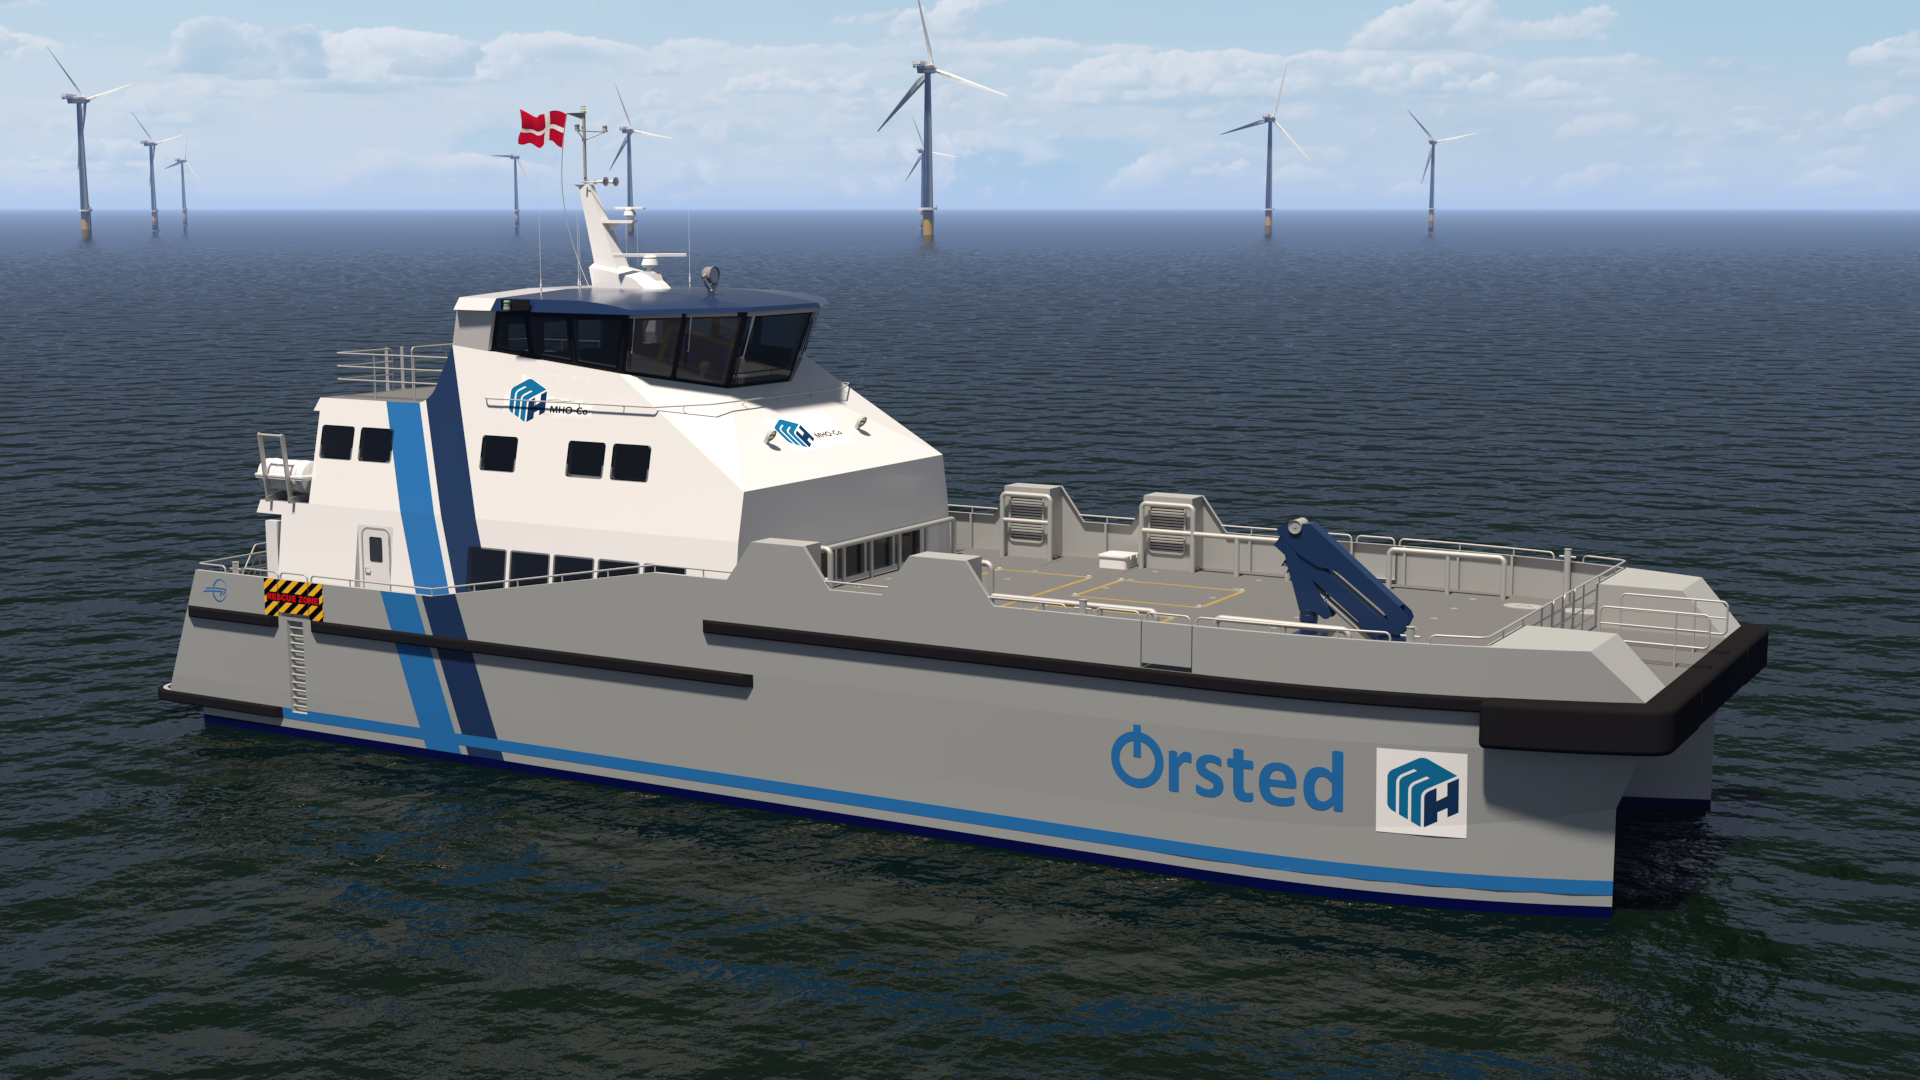 Artist's impression of the hybrid CTV at an offshore wind farm